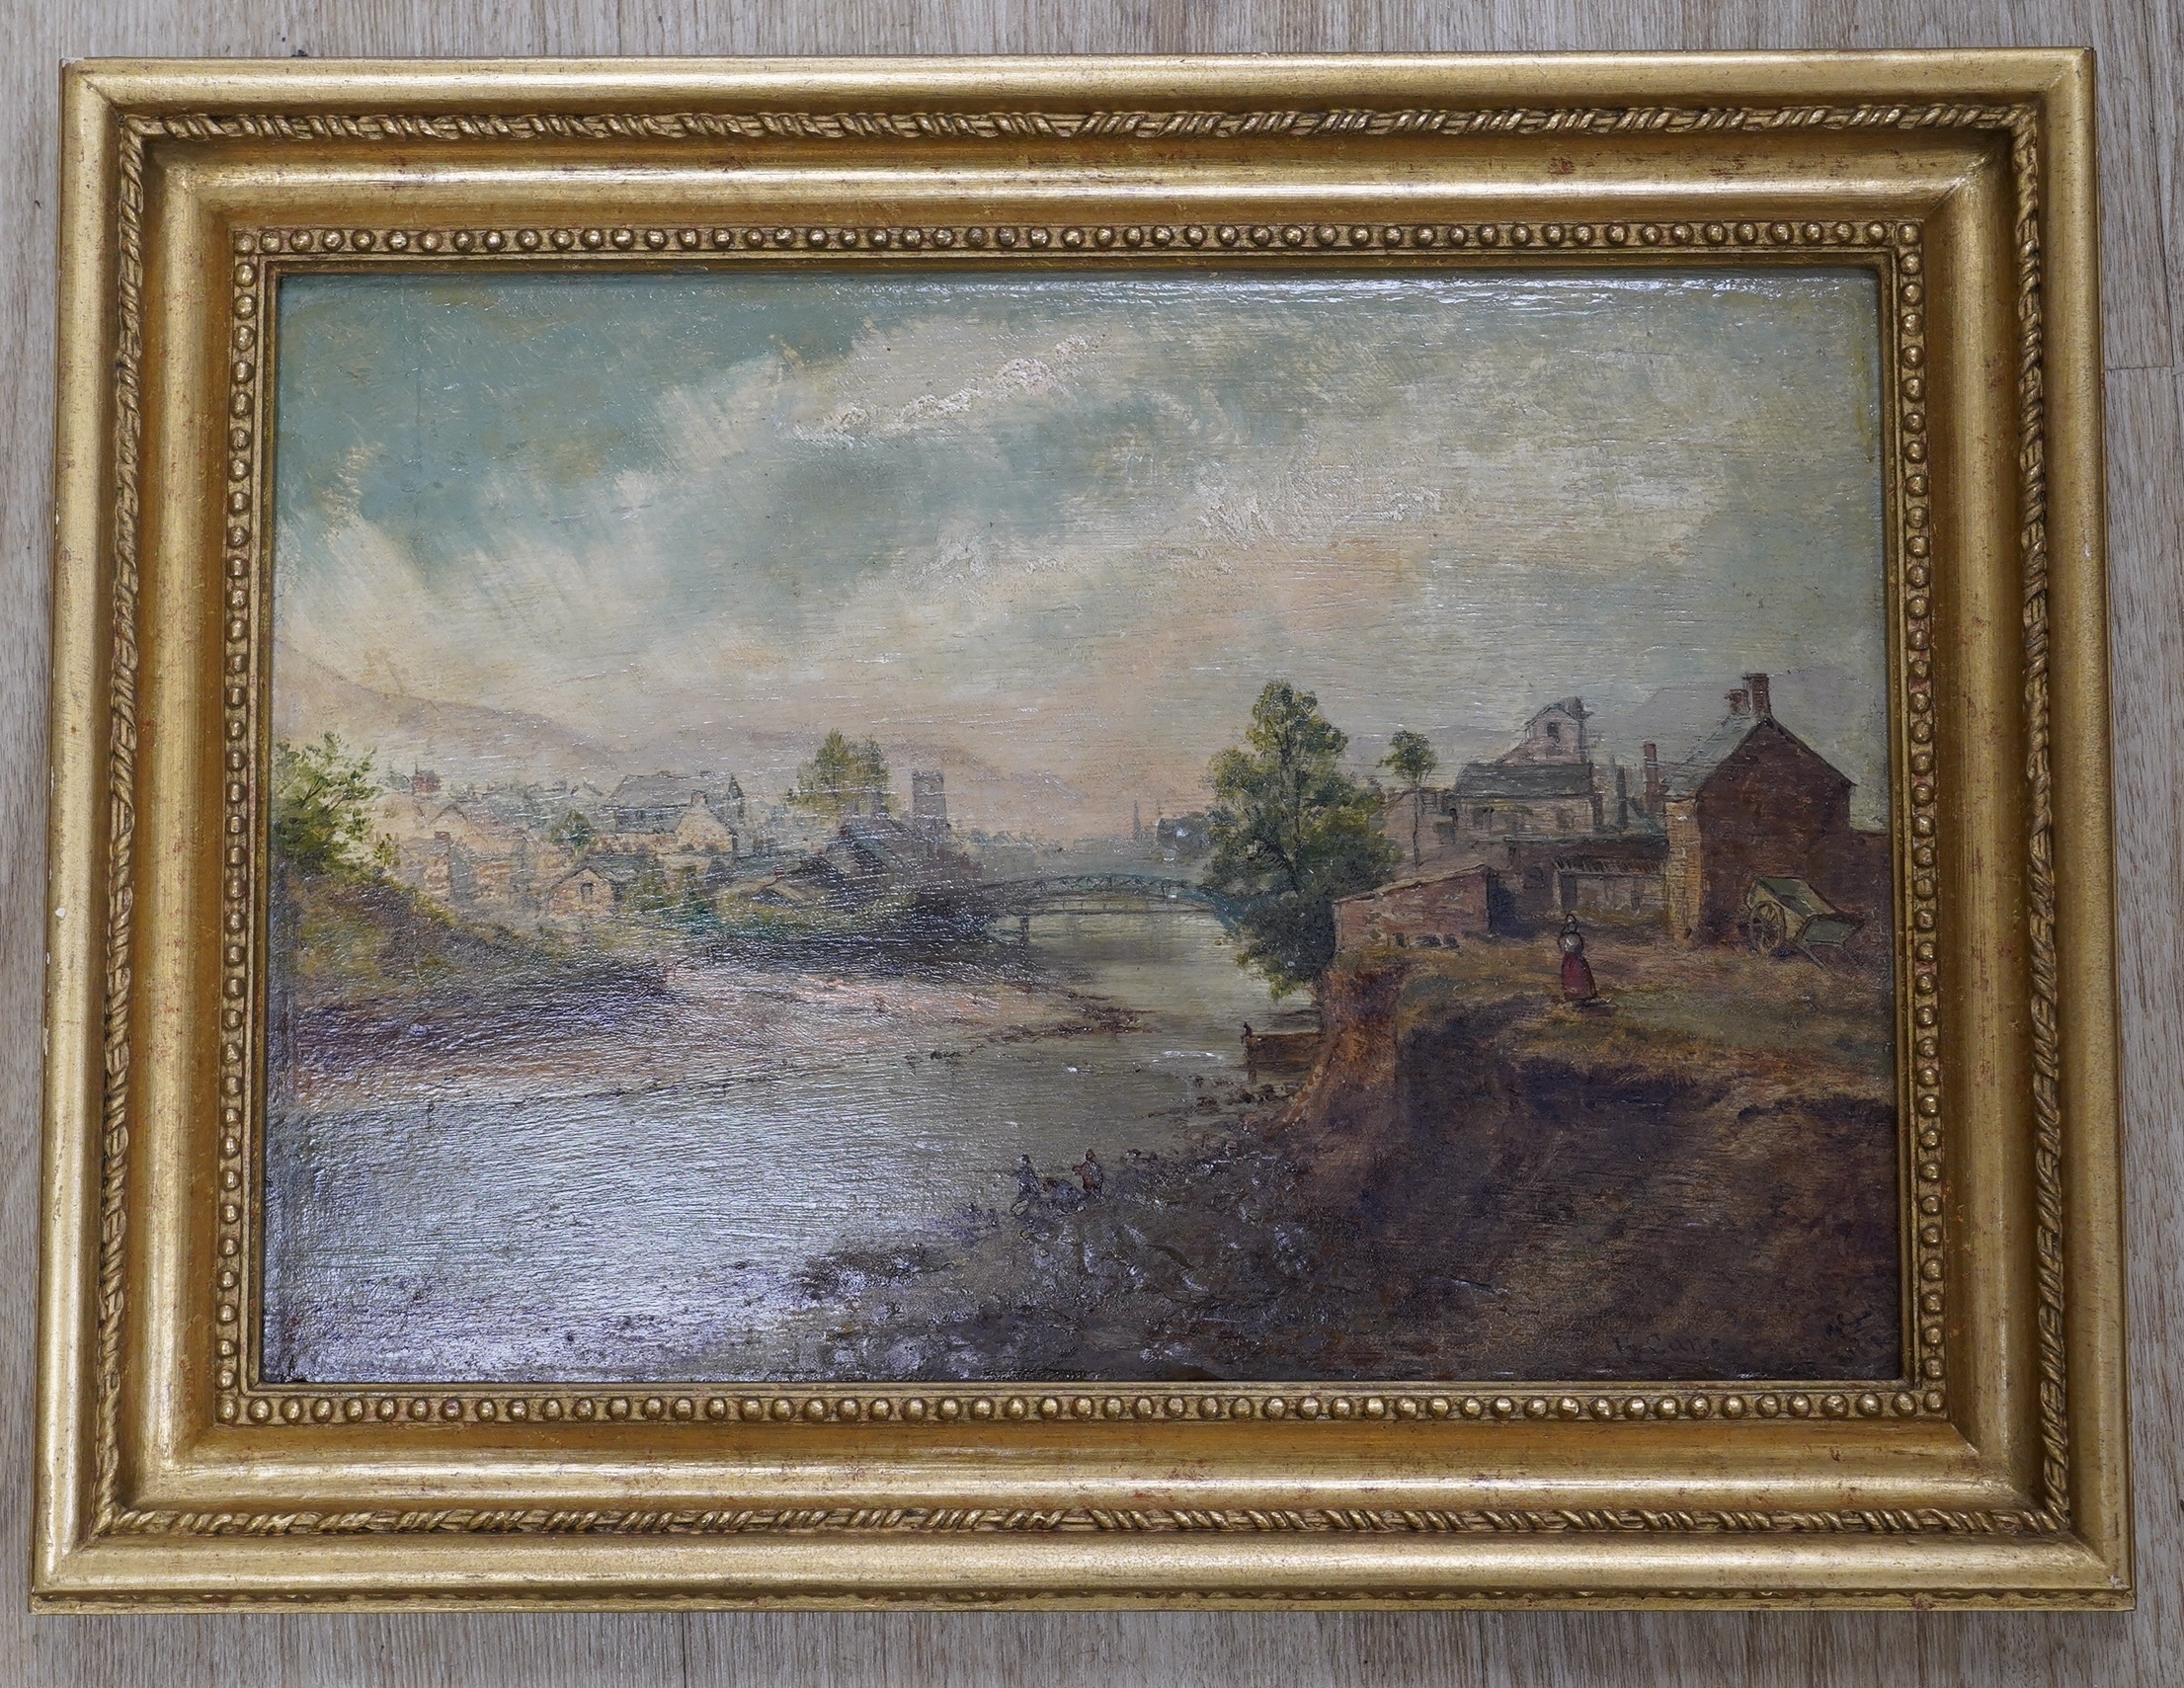 H. Cane (19th/20th. C), oil on board, ‘Merthyr Tydfil’, signed, inscribed verso, 25 x 36cm. Condition - poor to fair, paint bubbling